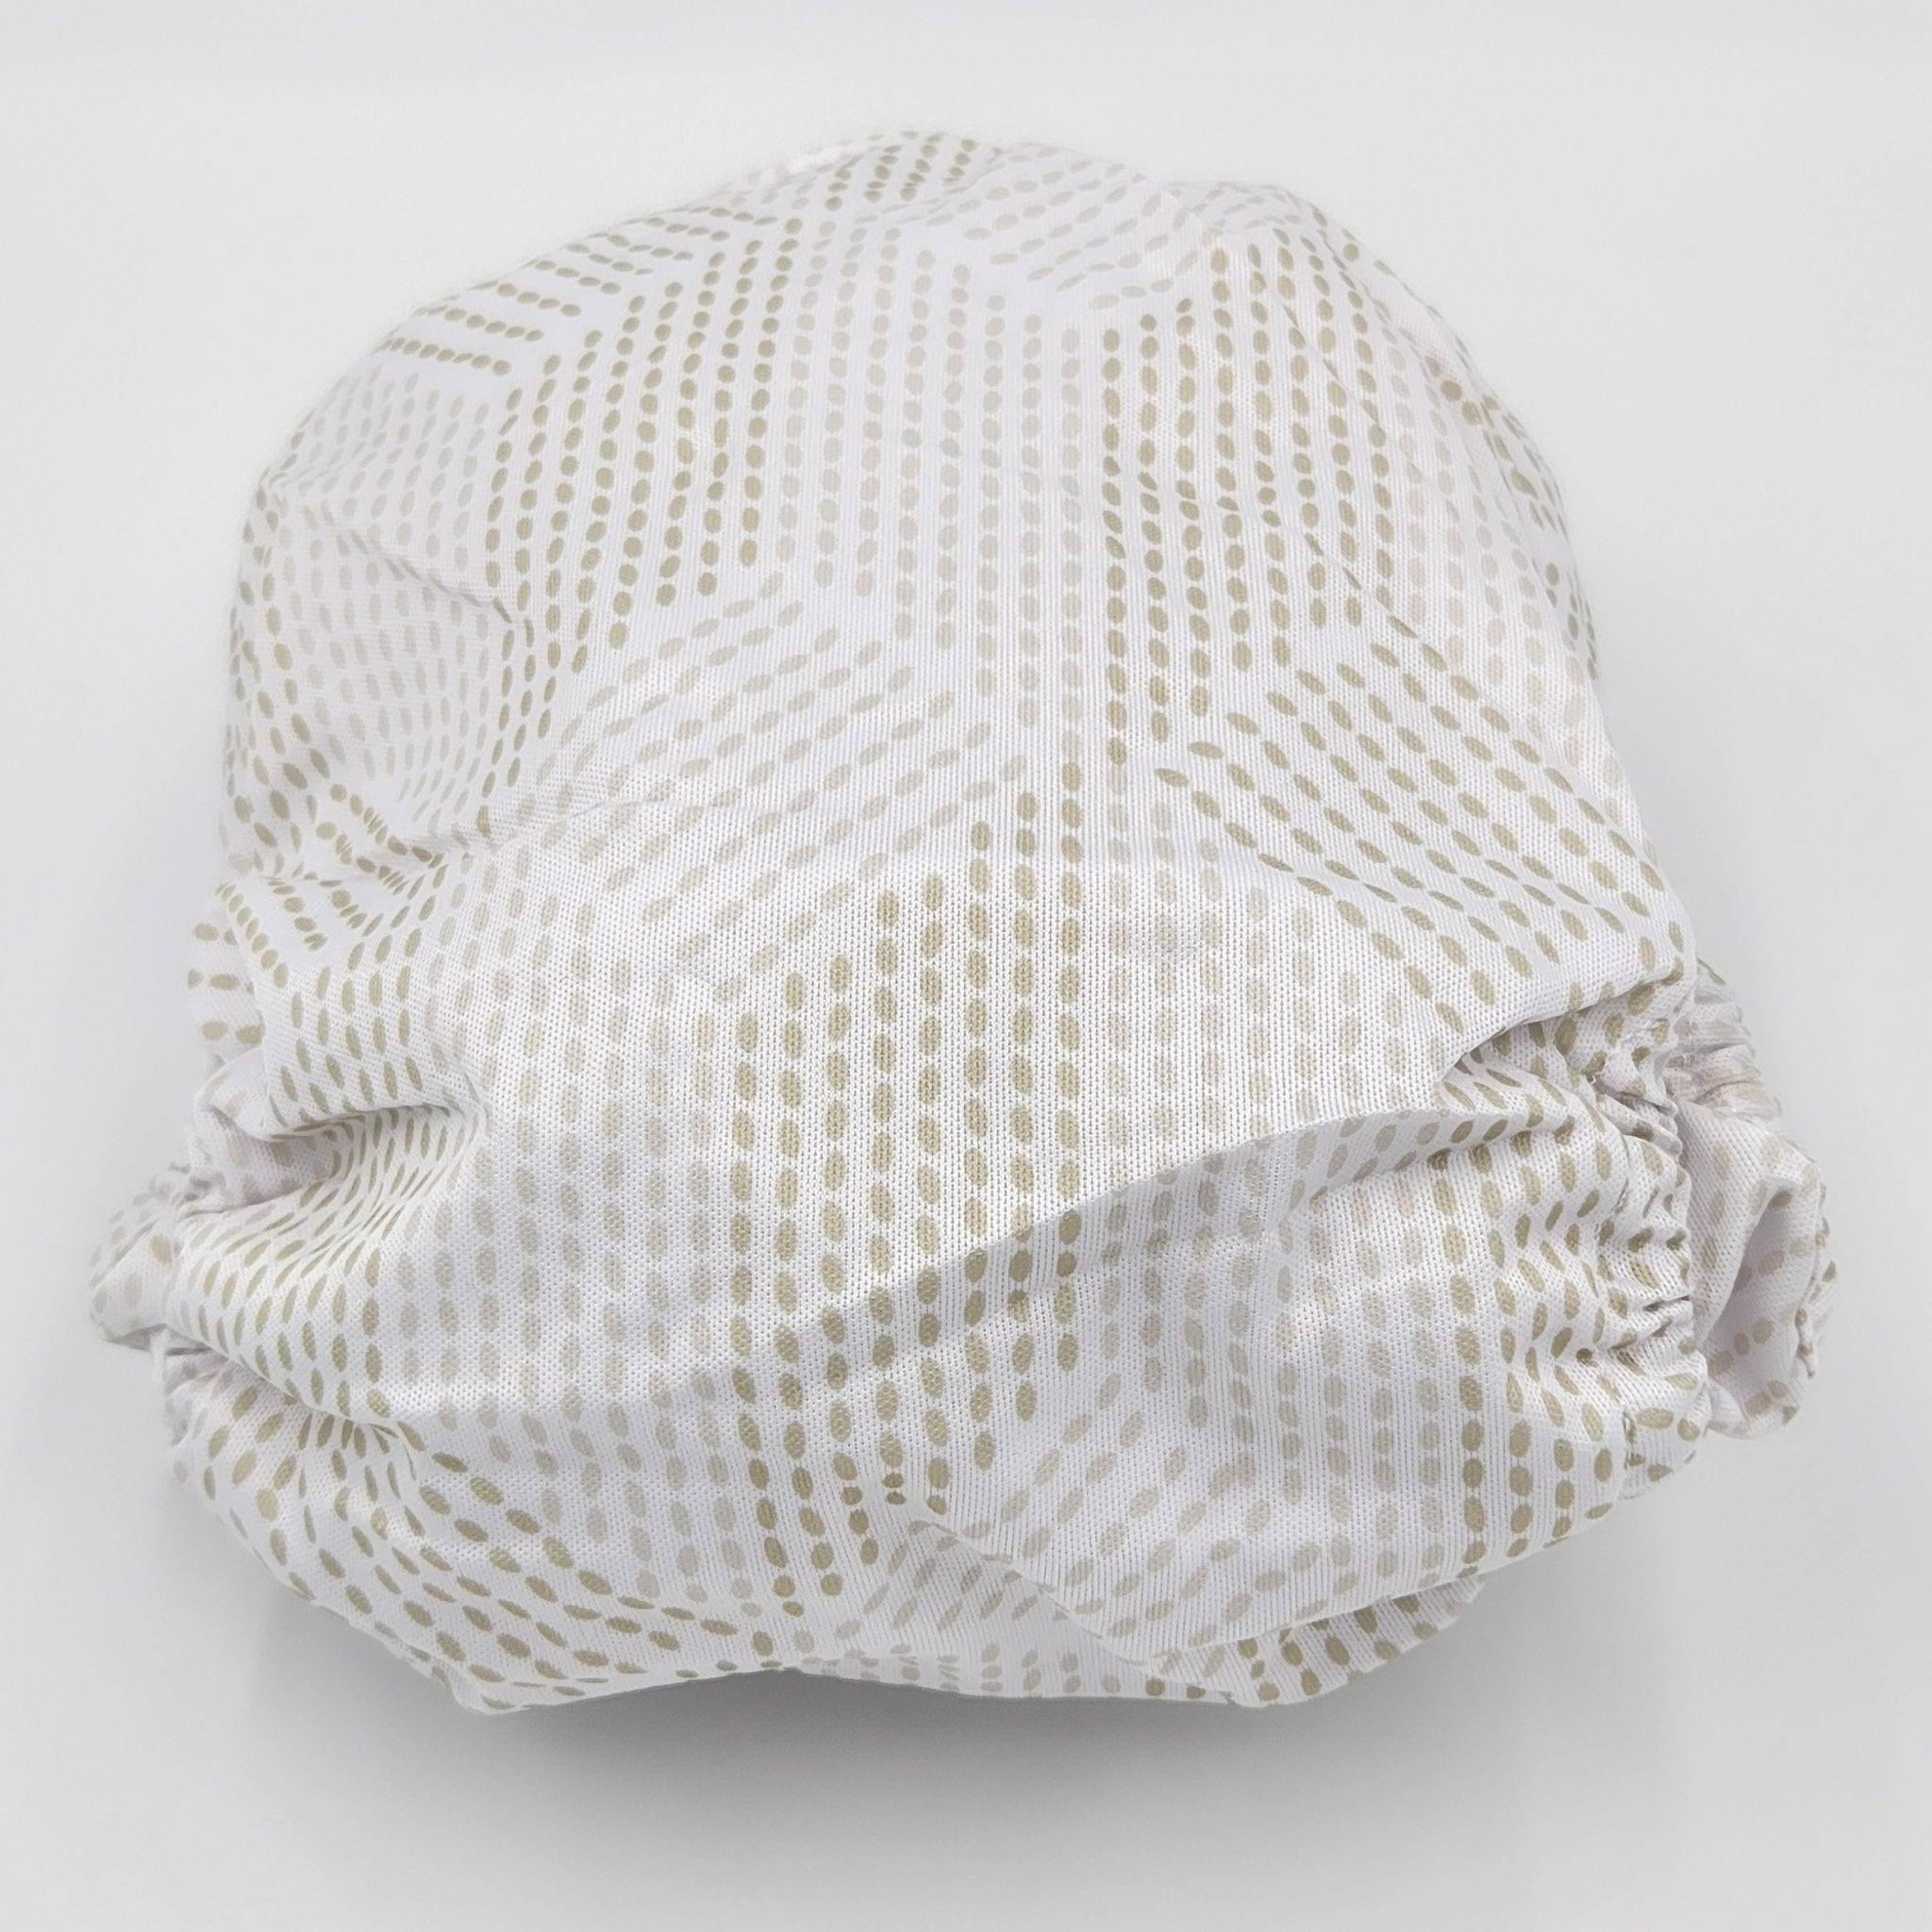 Reusable Modern Cloth Nappy 2.0 - Illusion - Be Bliss Baby